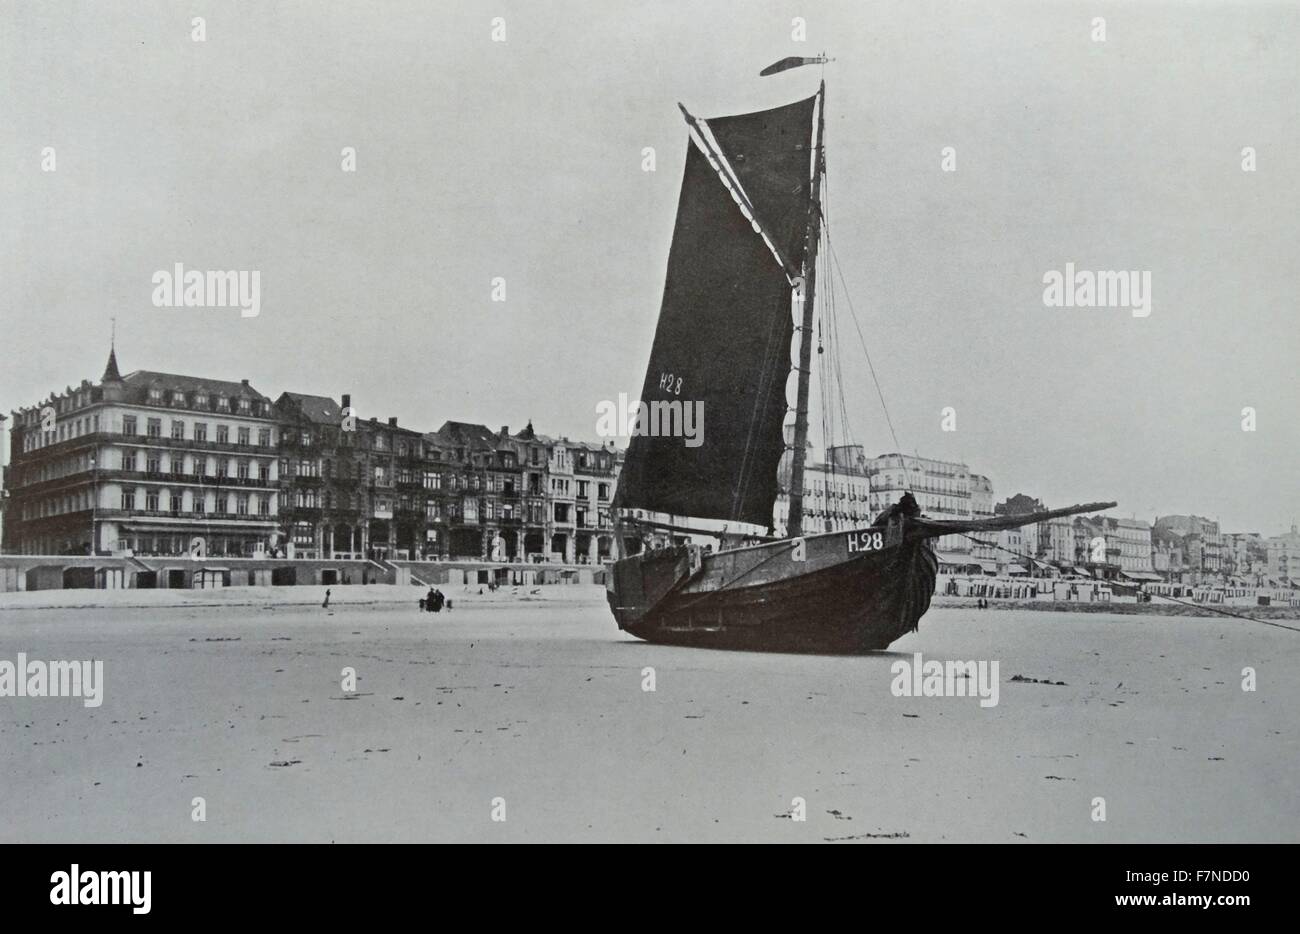 A boat by the shore, Liege, Belgium 1914 Stock Photo